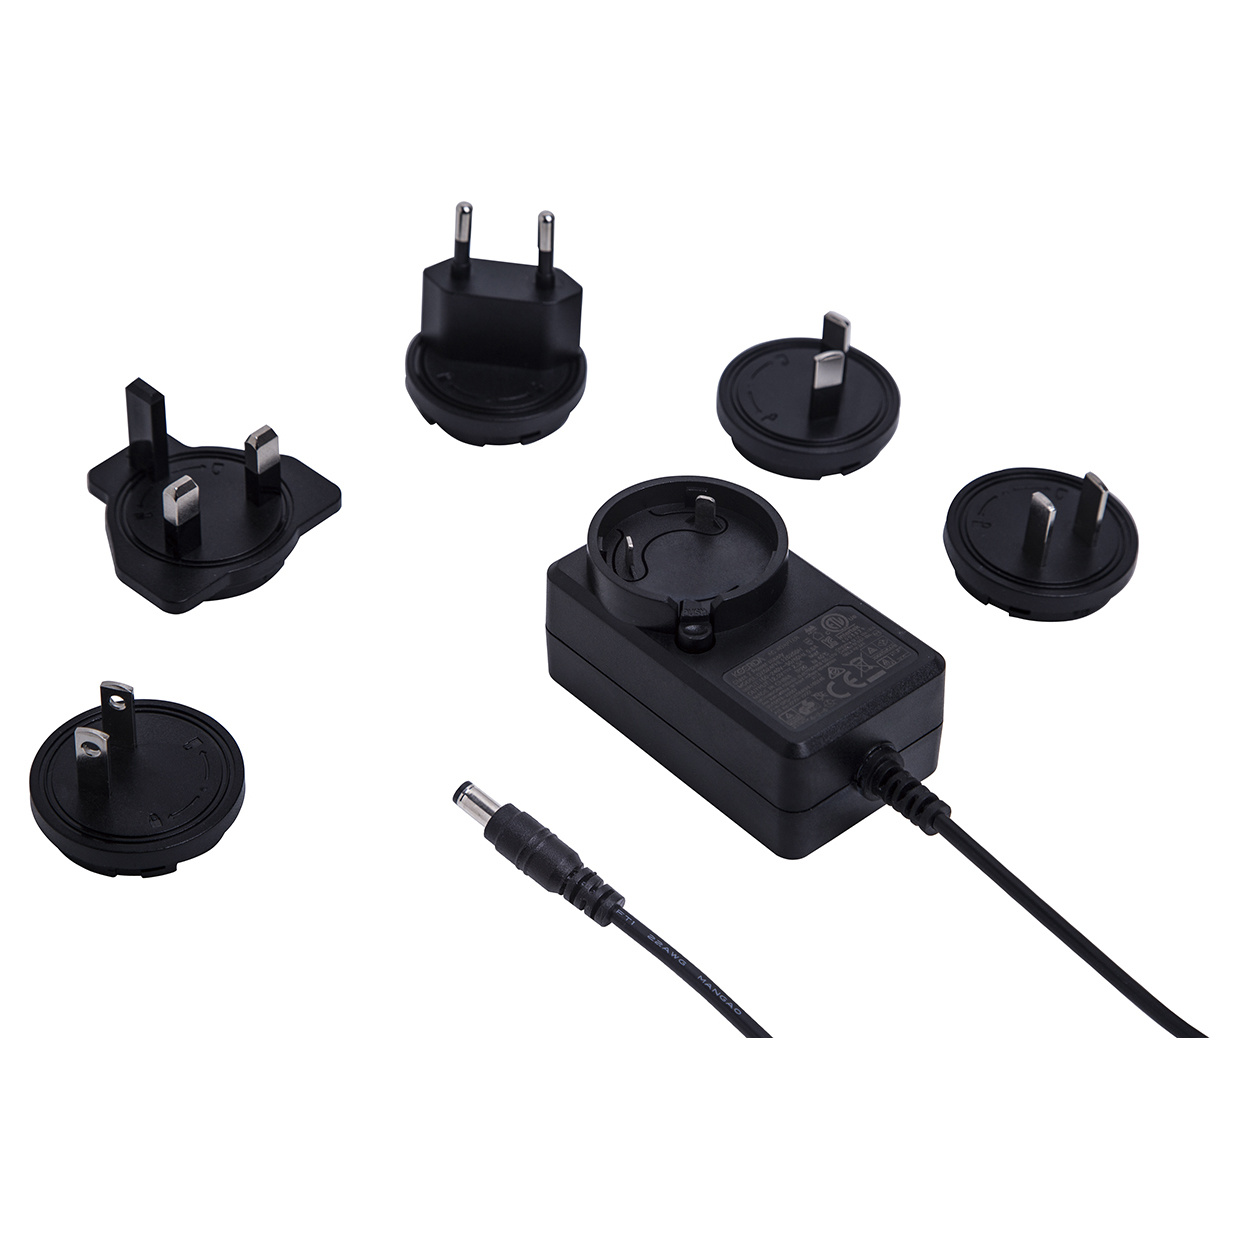 24W12V2A POWER ADAPTER WITH INTERCHANGEALBLE PLUG